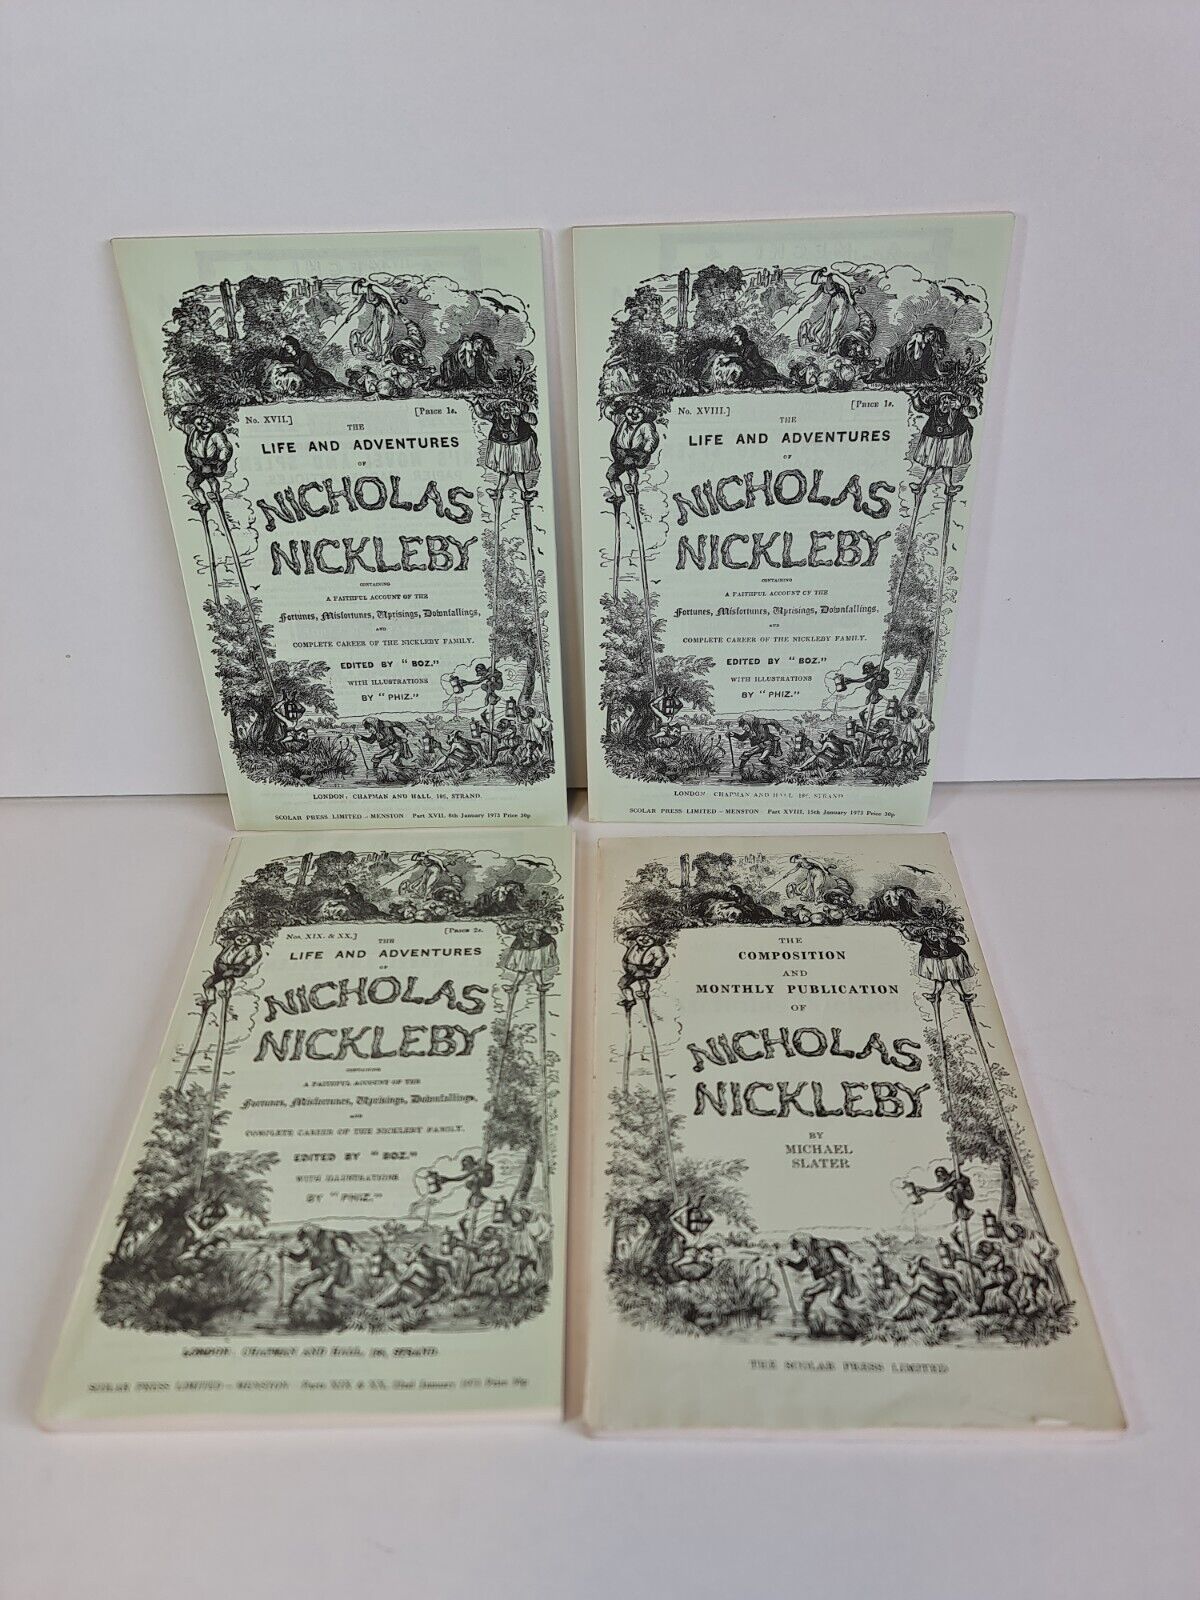 The Life and Adventures of Nicholas Nickleby by Charles Dickens - 20 vol set